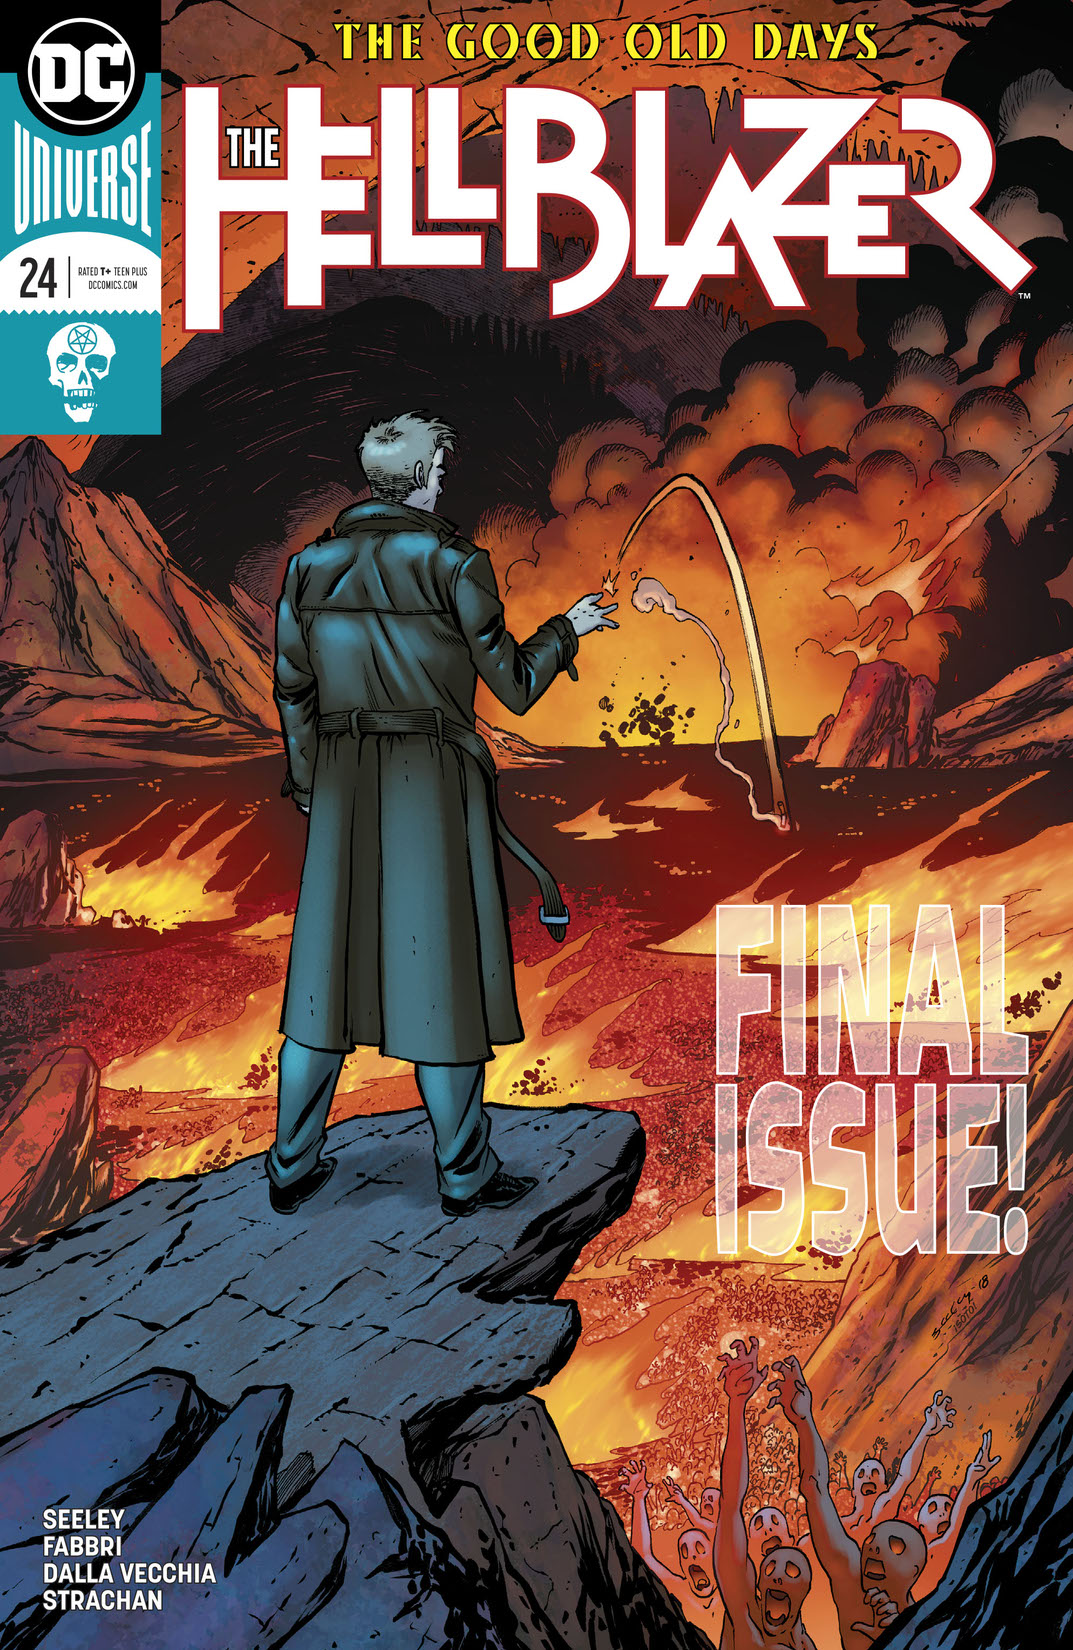 The Hellblazer #24 preview images